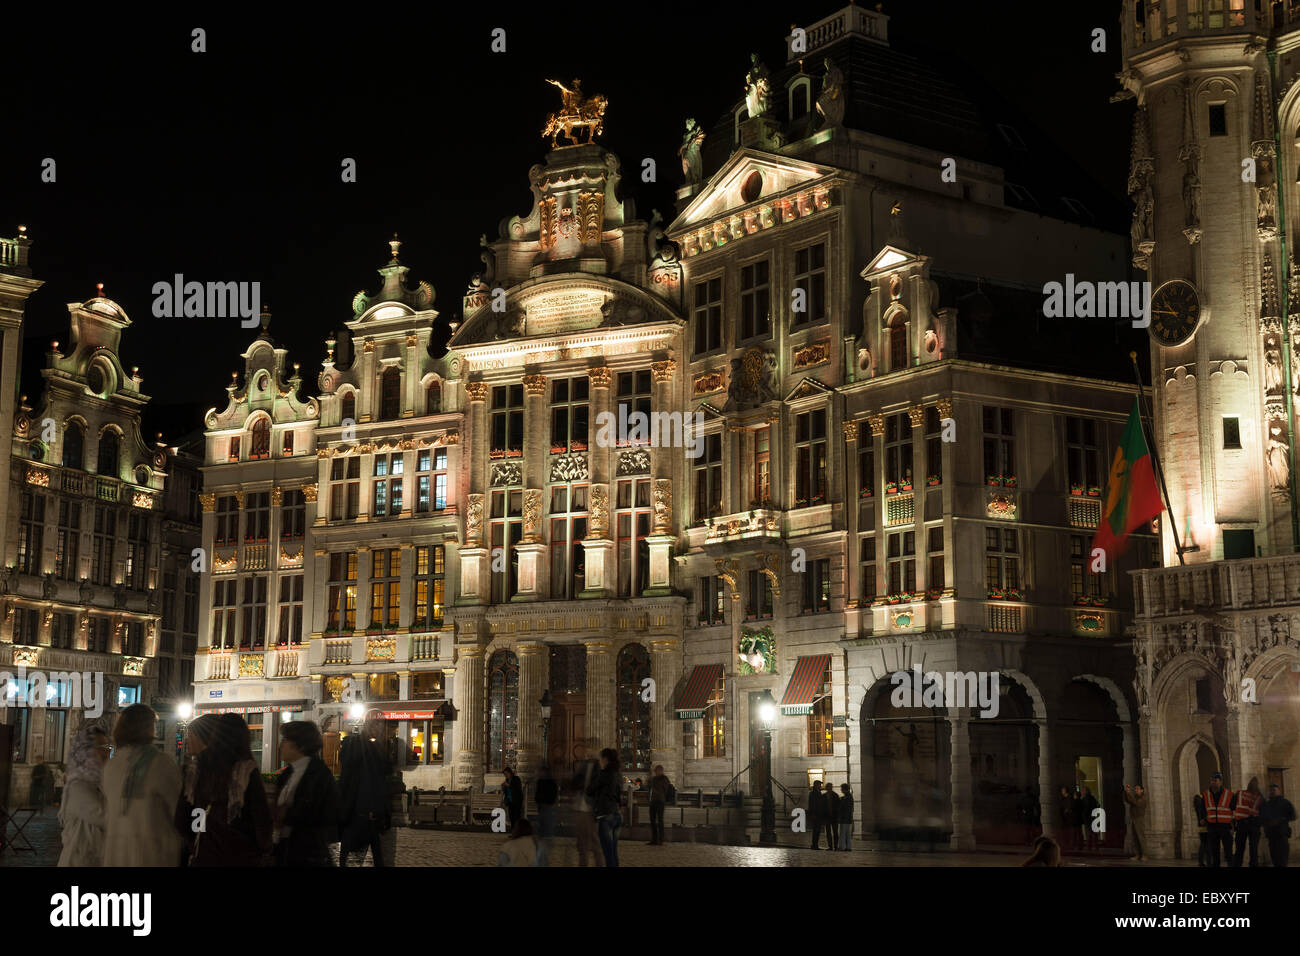 Grote Markt, Grand Place market square, Brussels, Brussels Region, Belgium Stock Photo